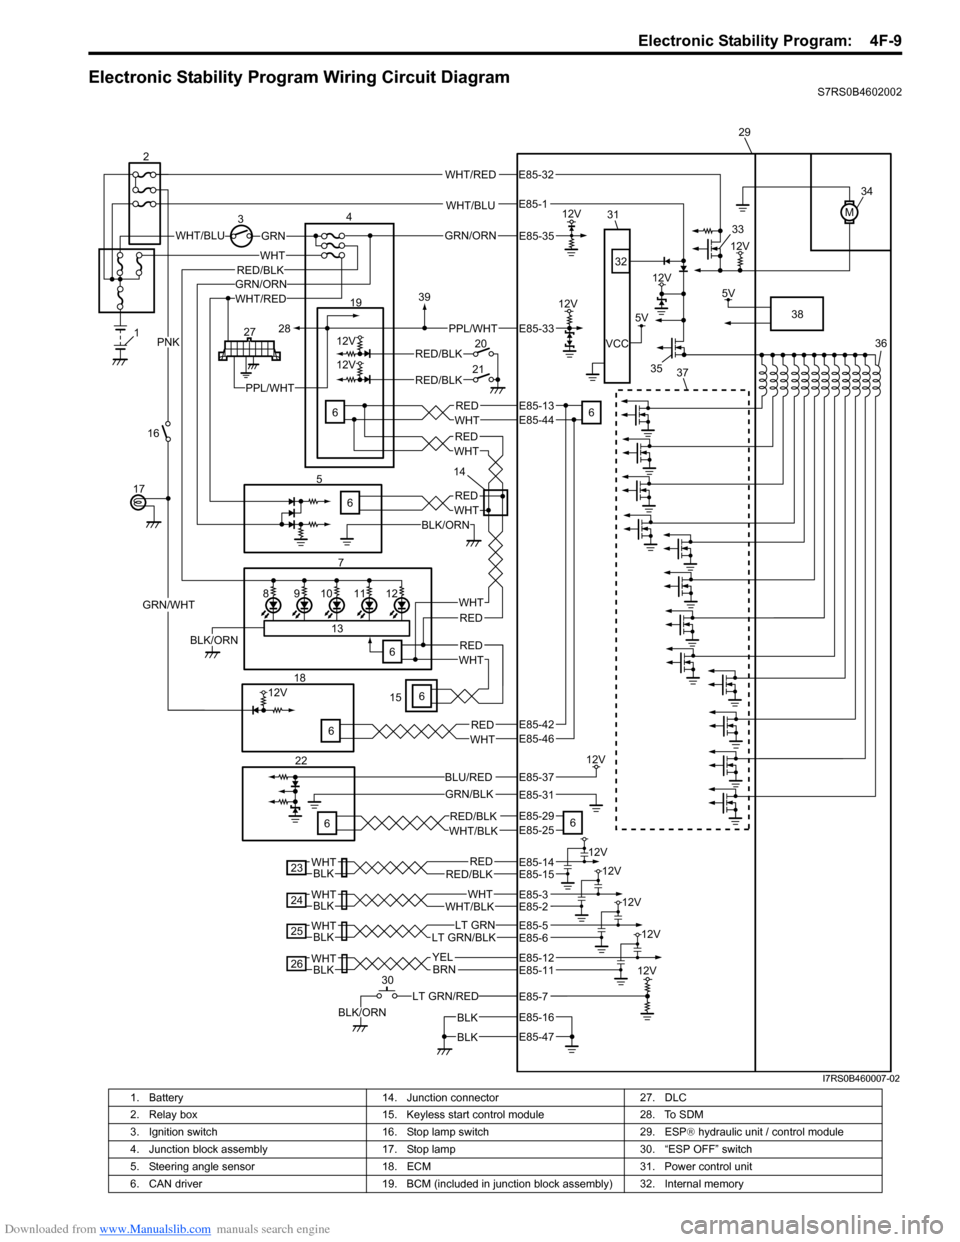 SUZUKI SWIFT 2008 2.G Service Manual Online Downloaded from www.Manualslib.com manuals search engine Electronic Stability Program:  4F-9
Electronic Stability Program Wiring Circuit DiagramS7RS0B4602002
WHT/BLU
WHT/BLUGRN
M
12V3
12V
5V
12V
VCC
W